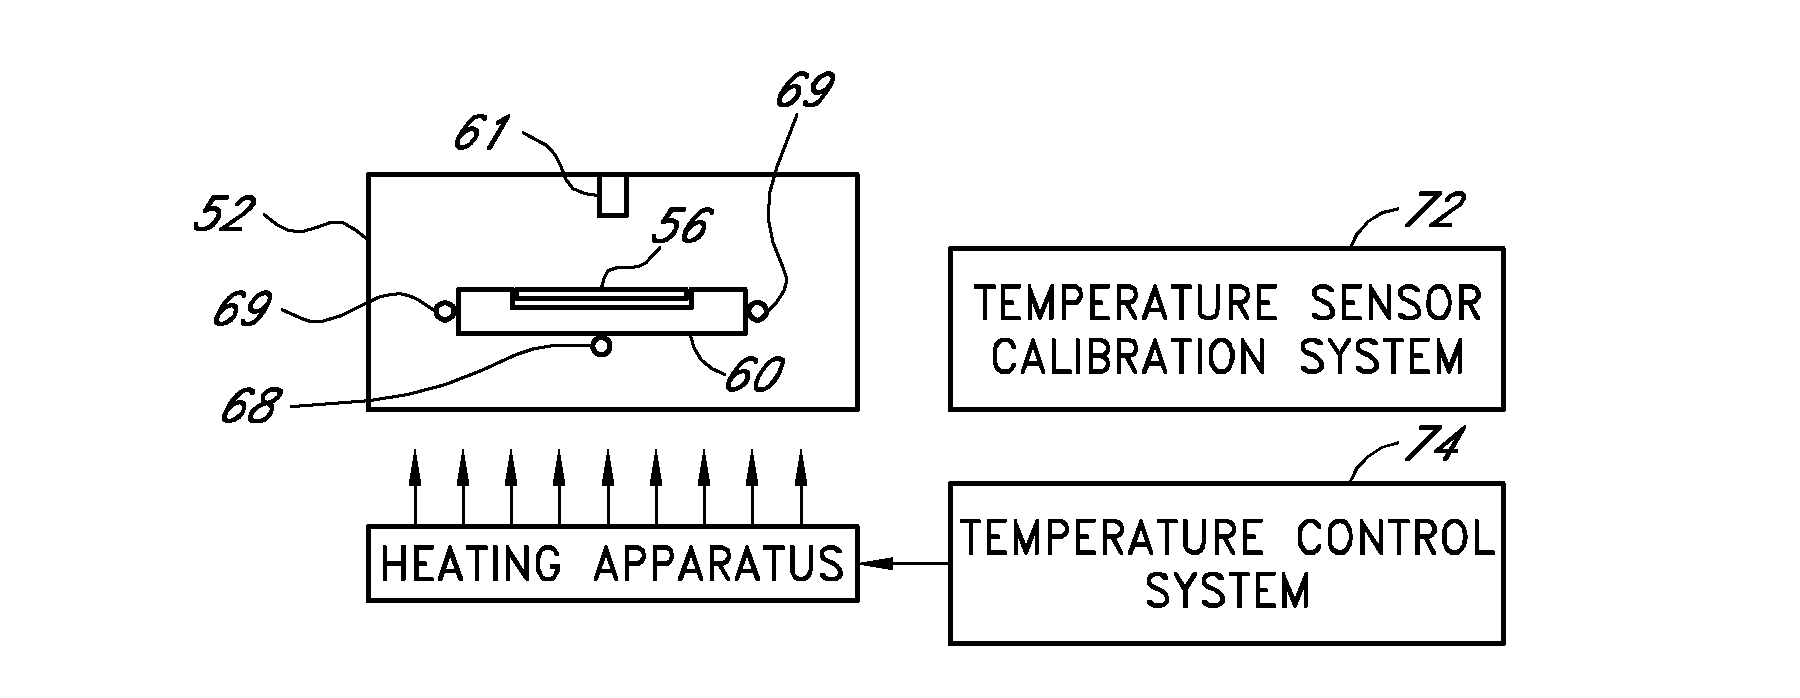 Calibration of temperature control system for semiconductor processing chamber